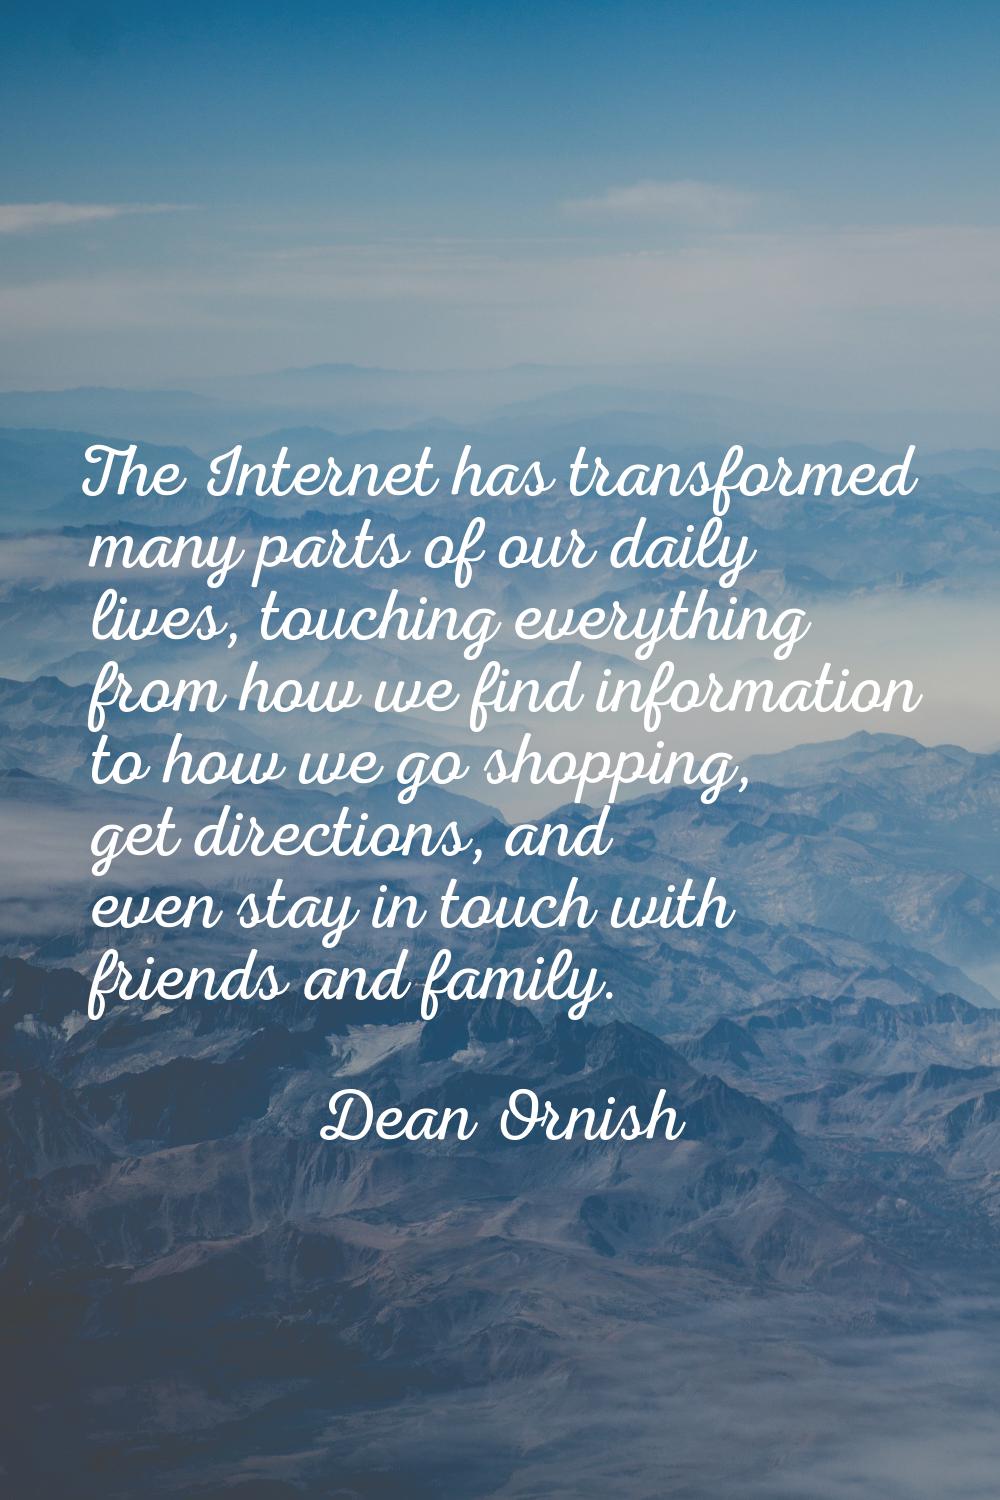 The Internet has transformed many parts of our daily lives, touching everything from how we find in